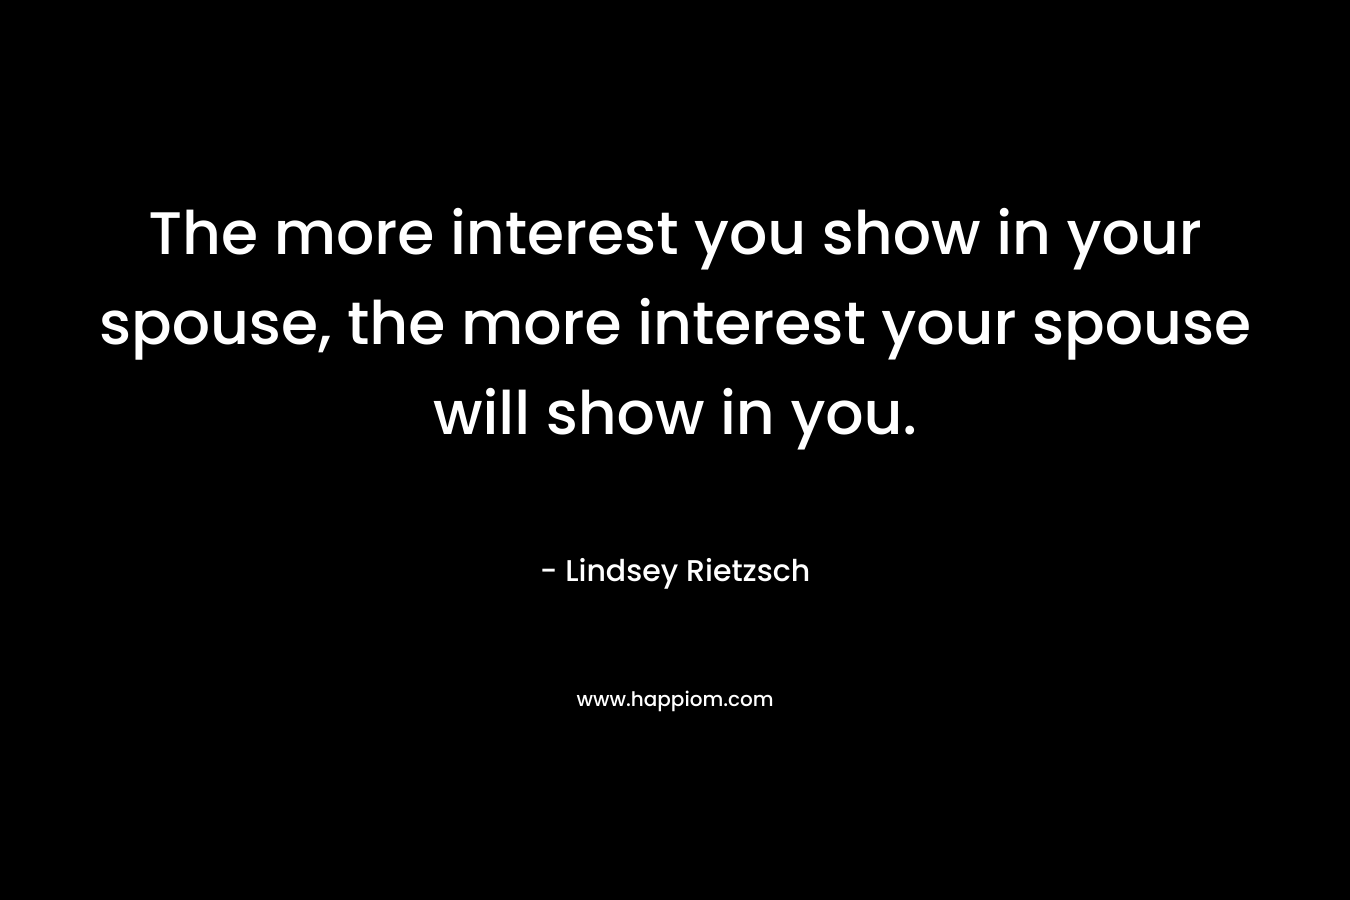 The more interest you show in your spouse, the more interest your spouse will show in you.